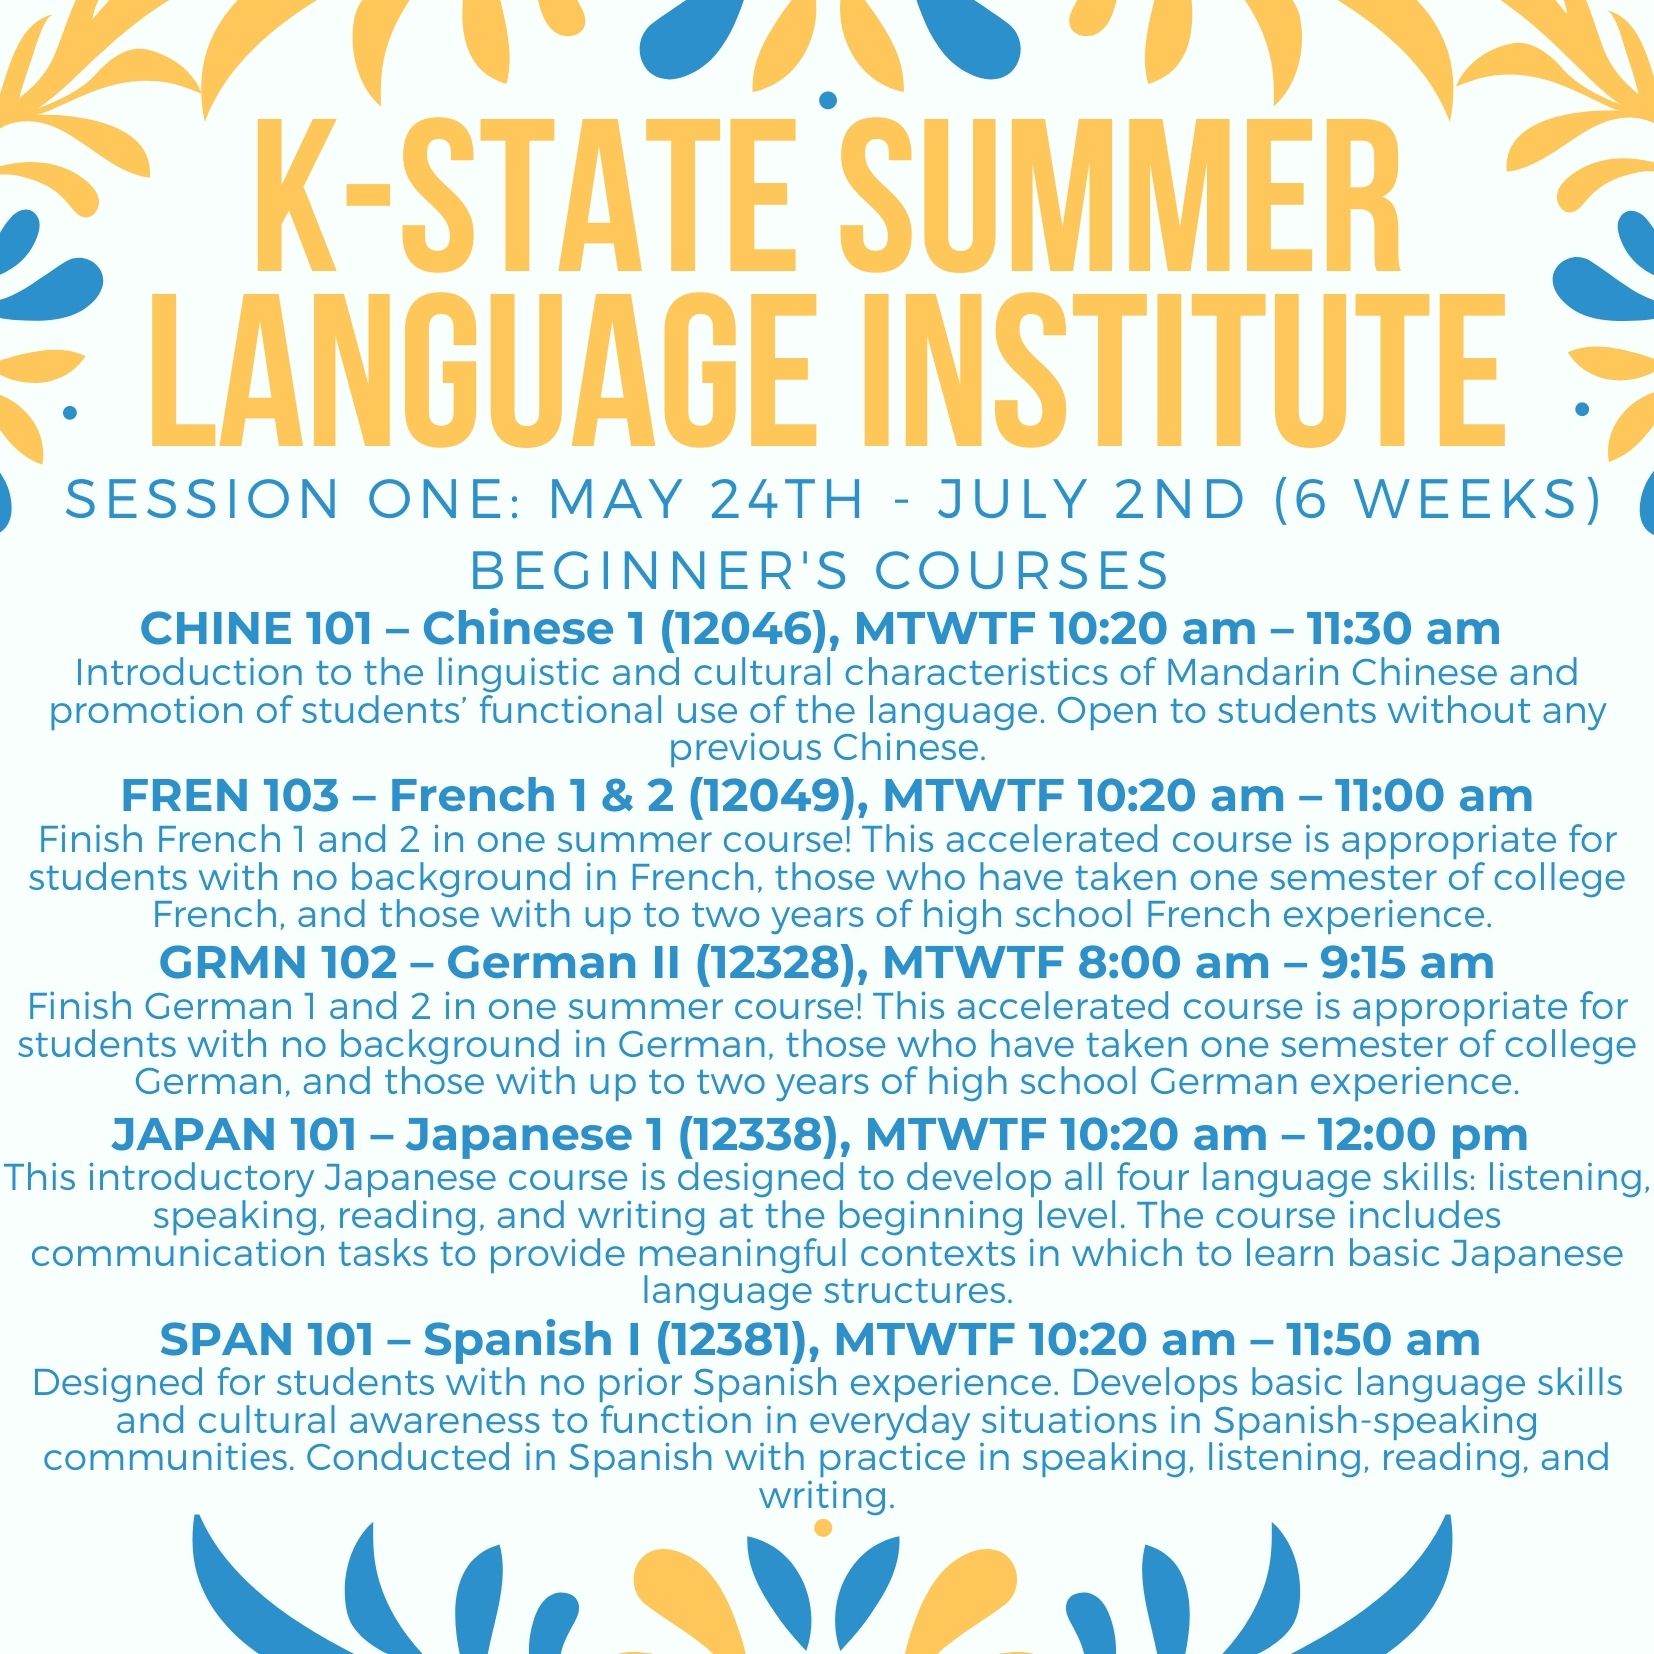 K-State Summer Languages Institute flyer, for Session One (May 24th - July 2nd (6 weeks)) Beginner's courses. CHINE 101 – Chinese 1 (12046), MTWTF 10:20 am – 11:30 am  Introduction to the linguistic and cultural characteristics of Mandarin Chinese and promotion of students’ functional use of the language. Open to students without any previous Chinese. FREN 103 – French 1 & 2 (12049), MTWTF 10:20 am – 11:00 am Finish French 1 and 2 in one summer course! This accelerated course is appropriate for students with no background in French, those who have taken one semester of college French, and those with up to two years of high school French experience. GRMN 102 – German II (12328), MTWTF 8:00 am – 9:15 am Finish German 1 and 2 in one summer course! This accelerated course is appropriate for students with no background in German, those who have taken one semester of college German, and those with up to two years of high school German experience. JAPAN 101 – Japanese 1 (12338), MTWTF 10:20 am – 12:00 pm  This introductory Japanese course is designed to develop all four language skills: listening, speaking, reading, and writing at the beginning level. The course includes communication tasks to provide meaningful contexts in which to learn basic Japanese language structures. SPAN 101 – Spanish I (12381), MTWTF 10:20 am – 11:50 am  Designed for students with no prior Spanish experience. Develops basic language skills and cultural awareness to function in everyday situations in Spanish-speaking communities. Conducted in Spanish with practice in speaking, listening, reading, and writing.